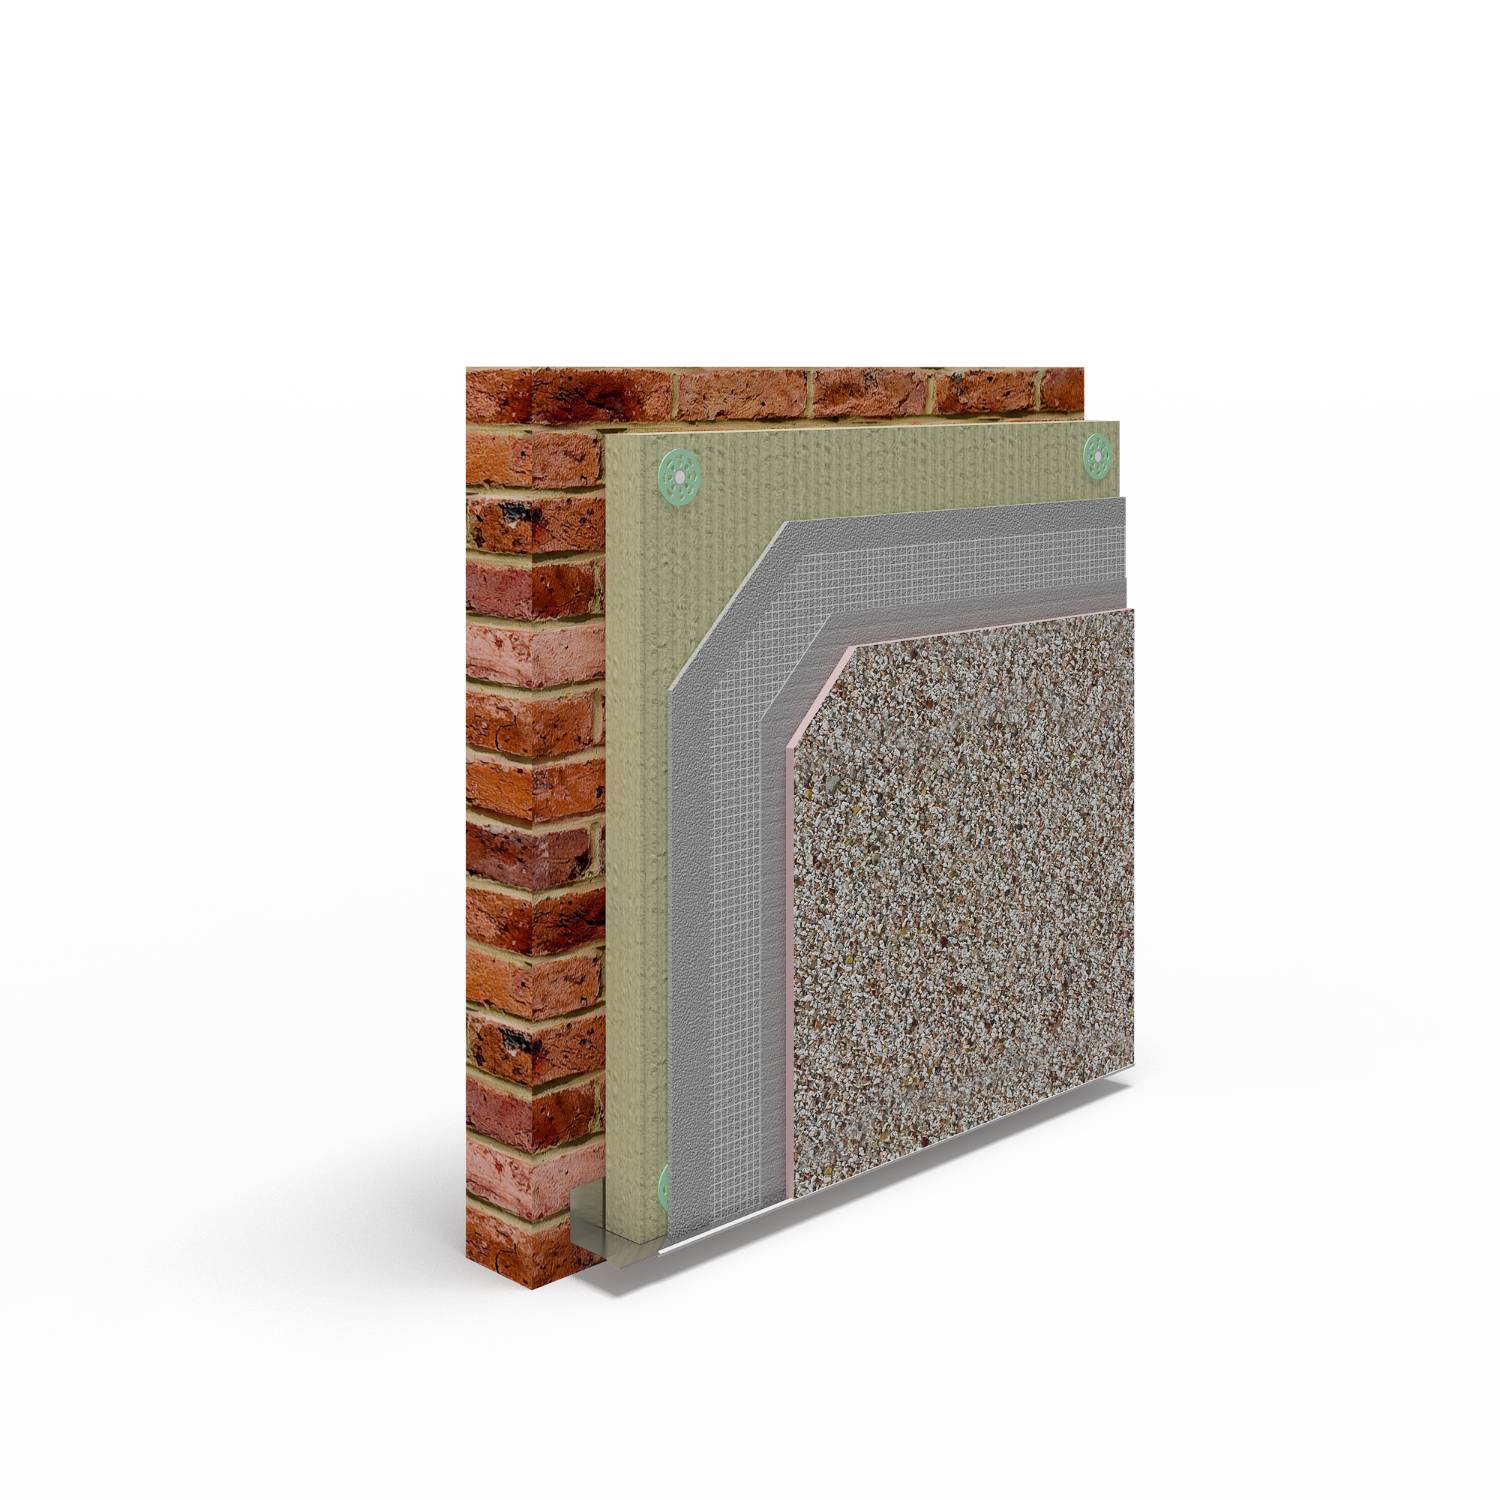 Epsicon 3 - External Wall Insulation System - PS3